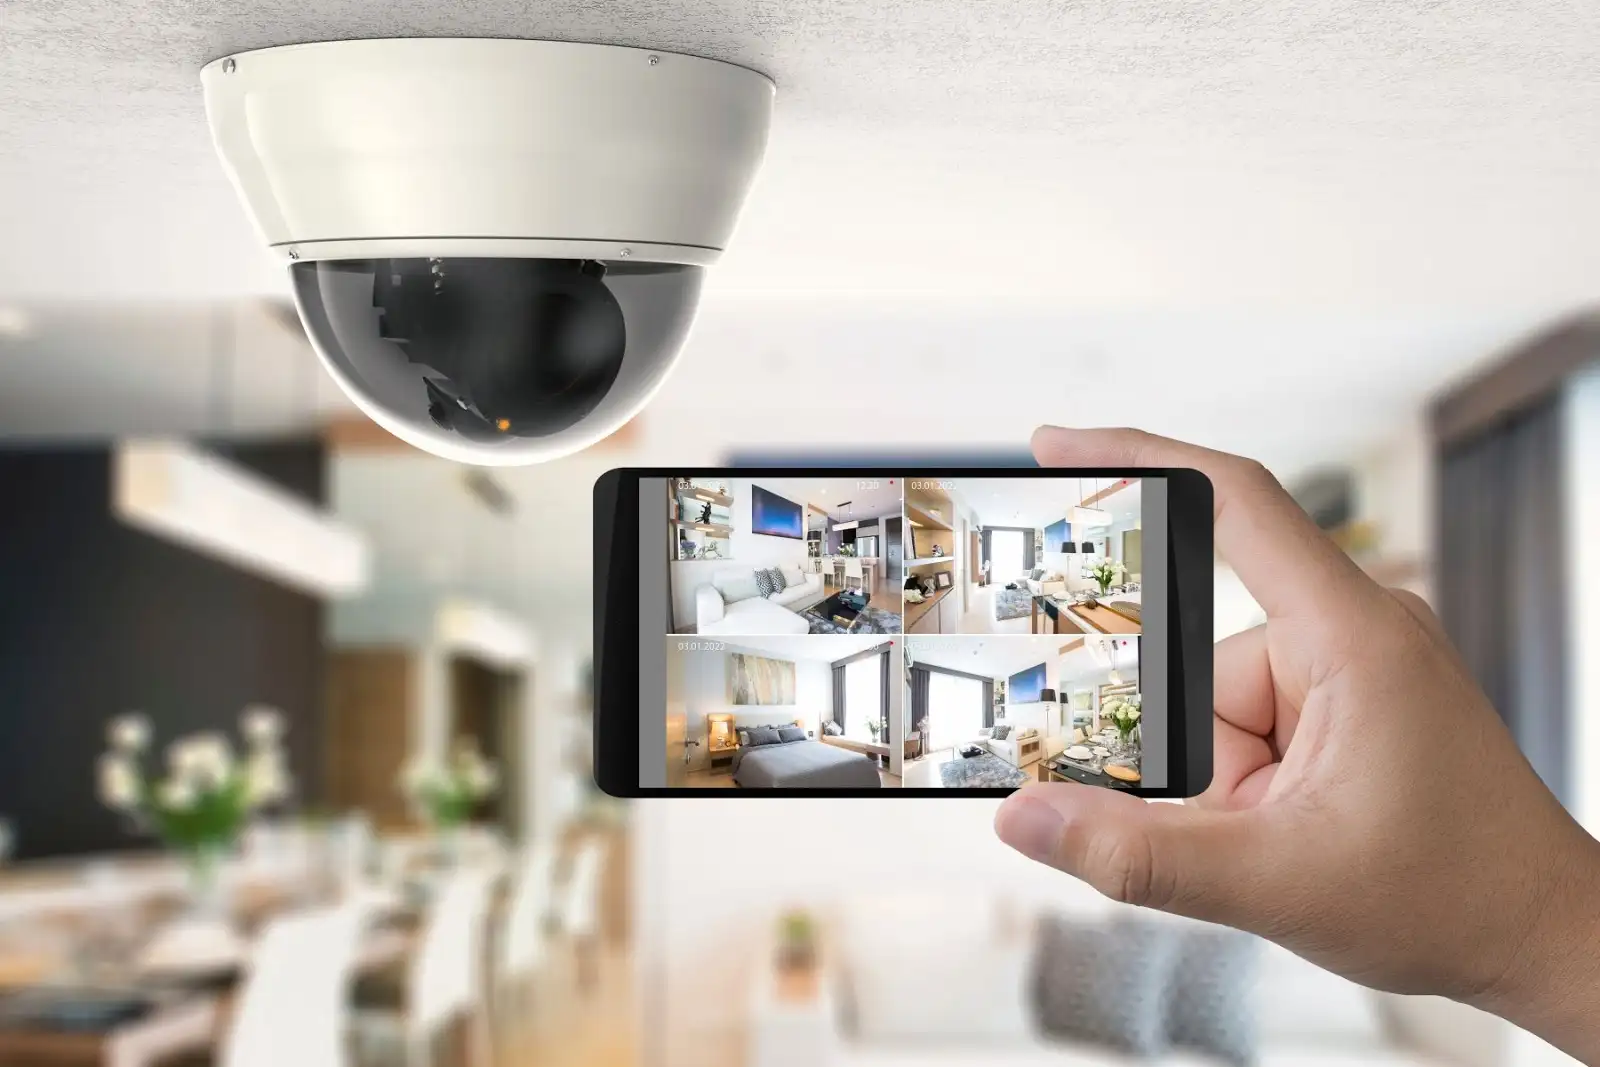 The Ethical Implications of IP Cameras in Modern Society